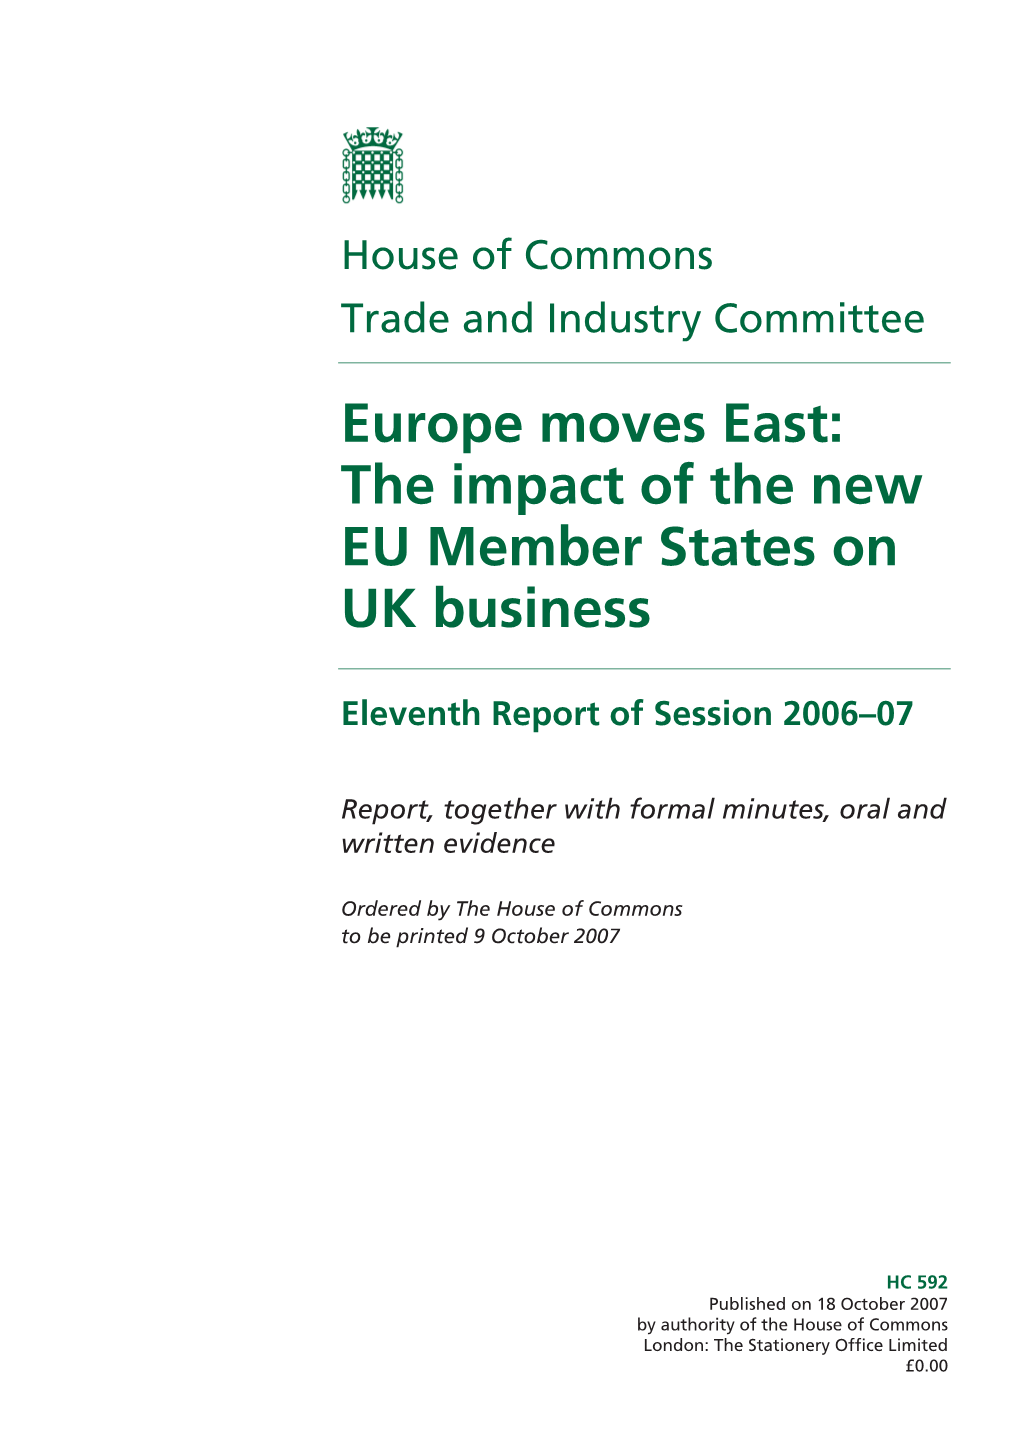 Europe Moves East: the Impact of the New EU Member States on UK Business